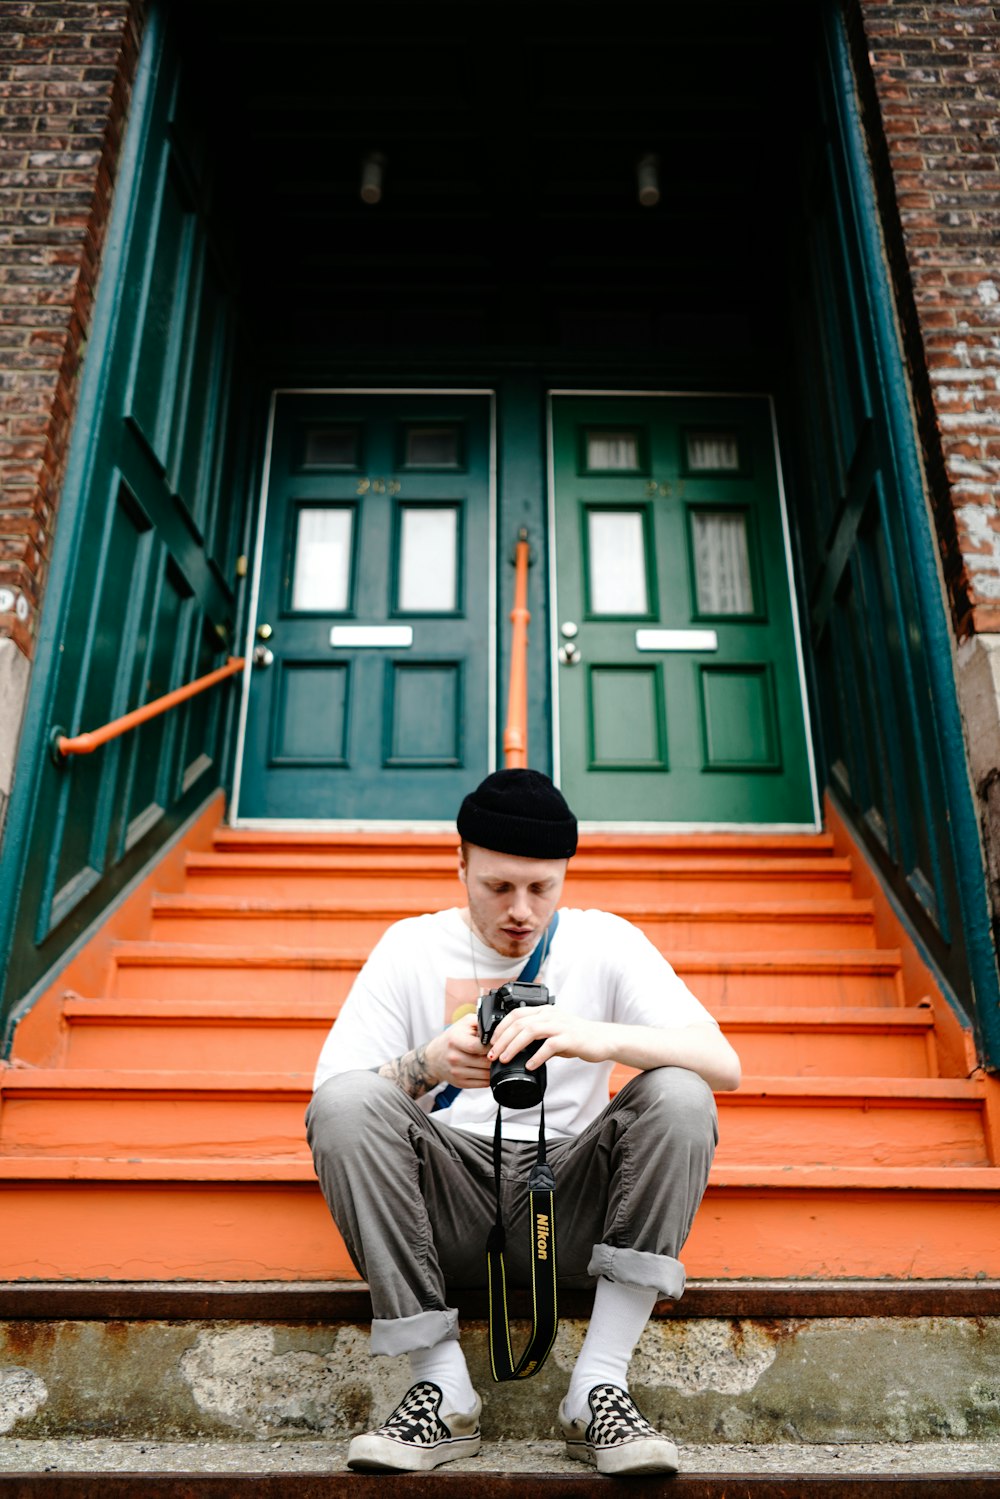 man seating in front of stair while holding DSLR camera